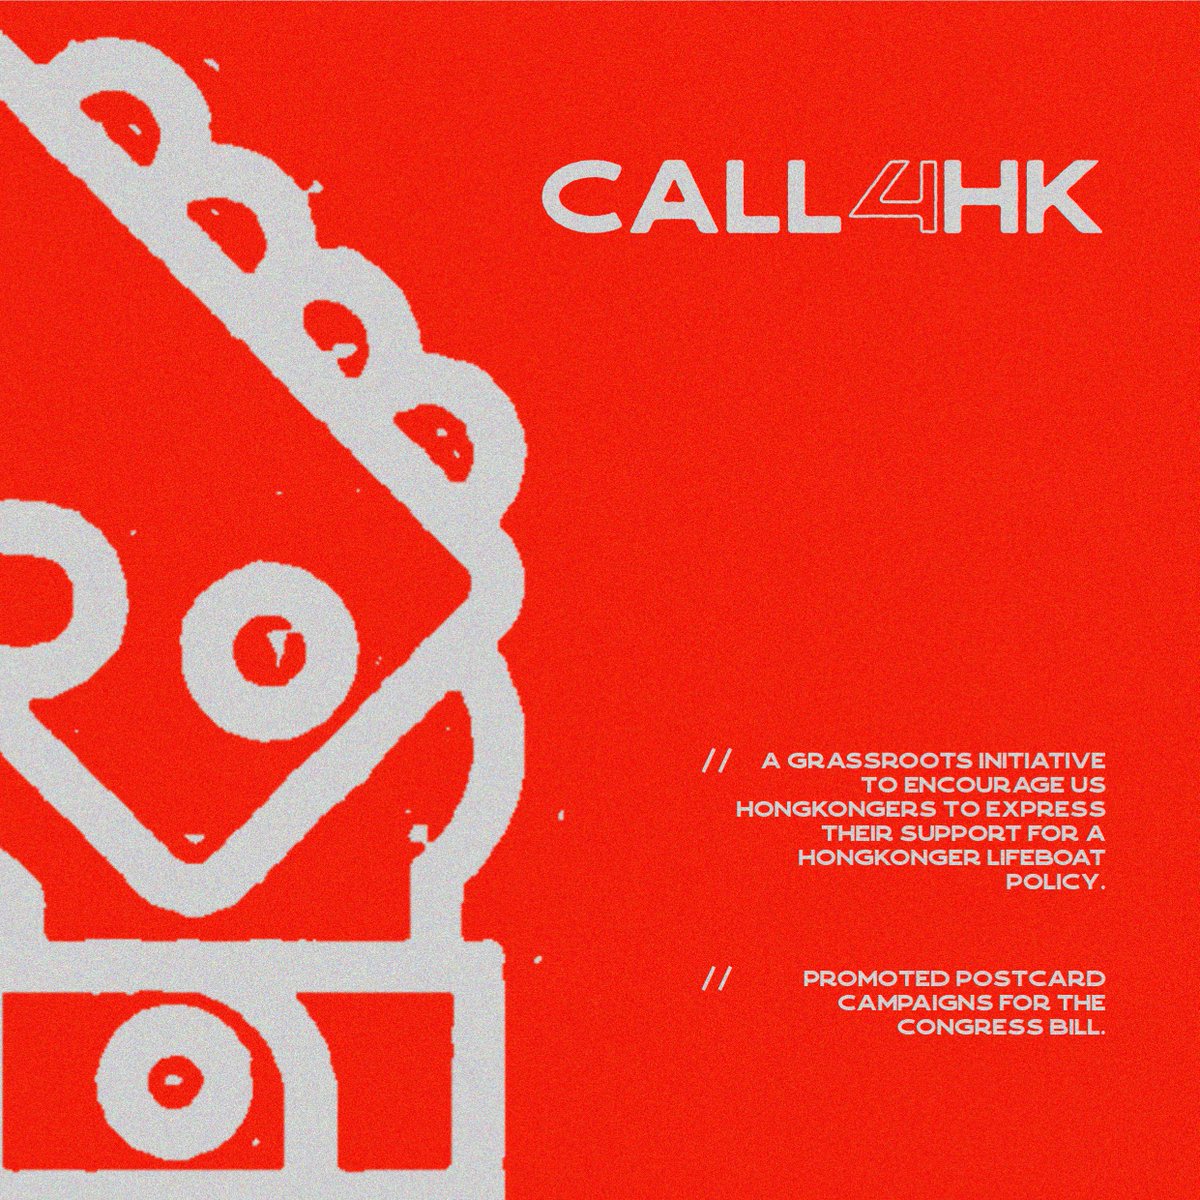 #Call4HK
Since day 1, we have been advocating US policies for HK. The HK Safe Harbor Act is one of the main goals that we are working toward for Hkers, whose safety is at risk under China's extensive oppression, to have a chance to resettle in the US.
#anniversarycountdown